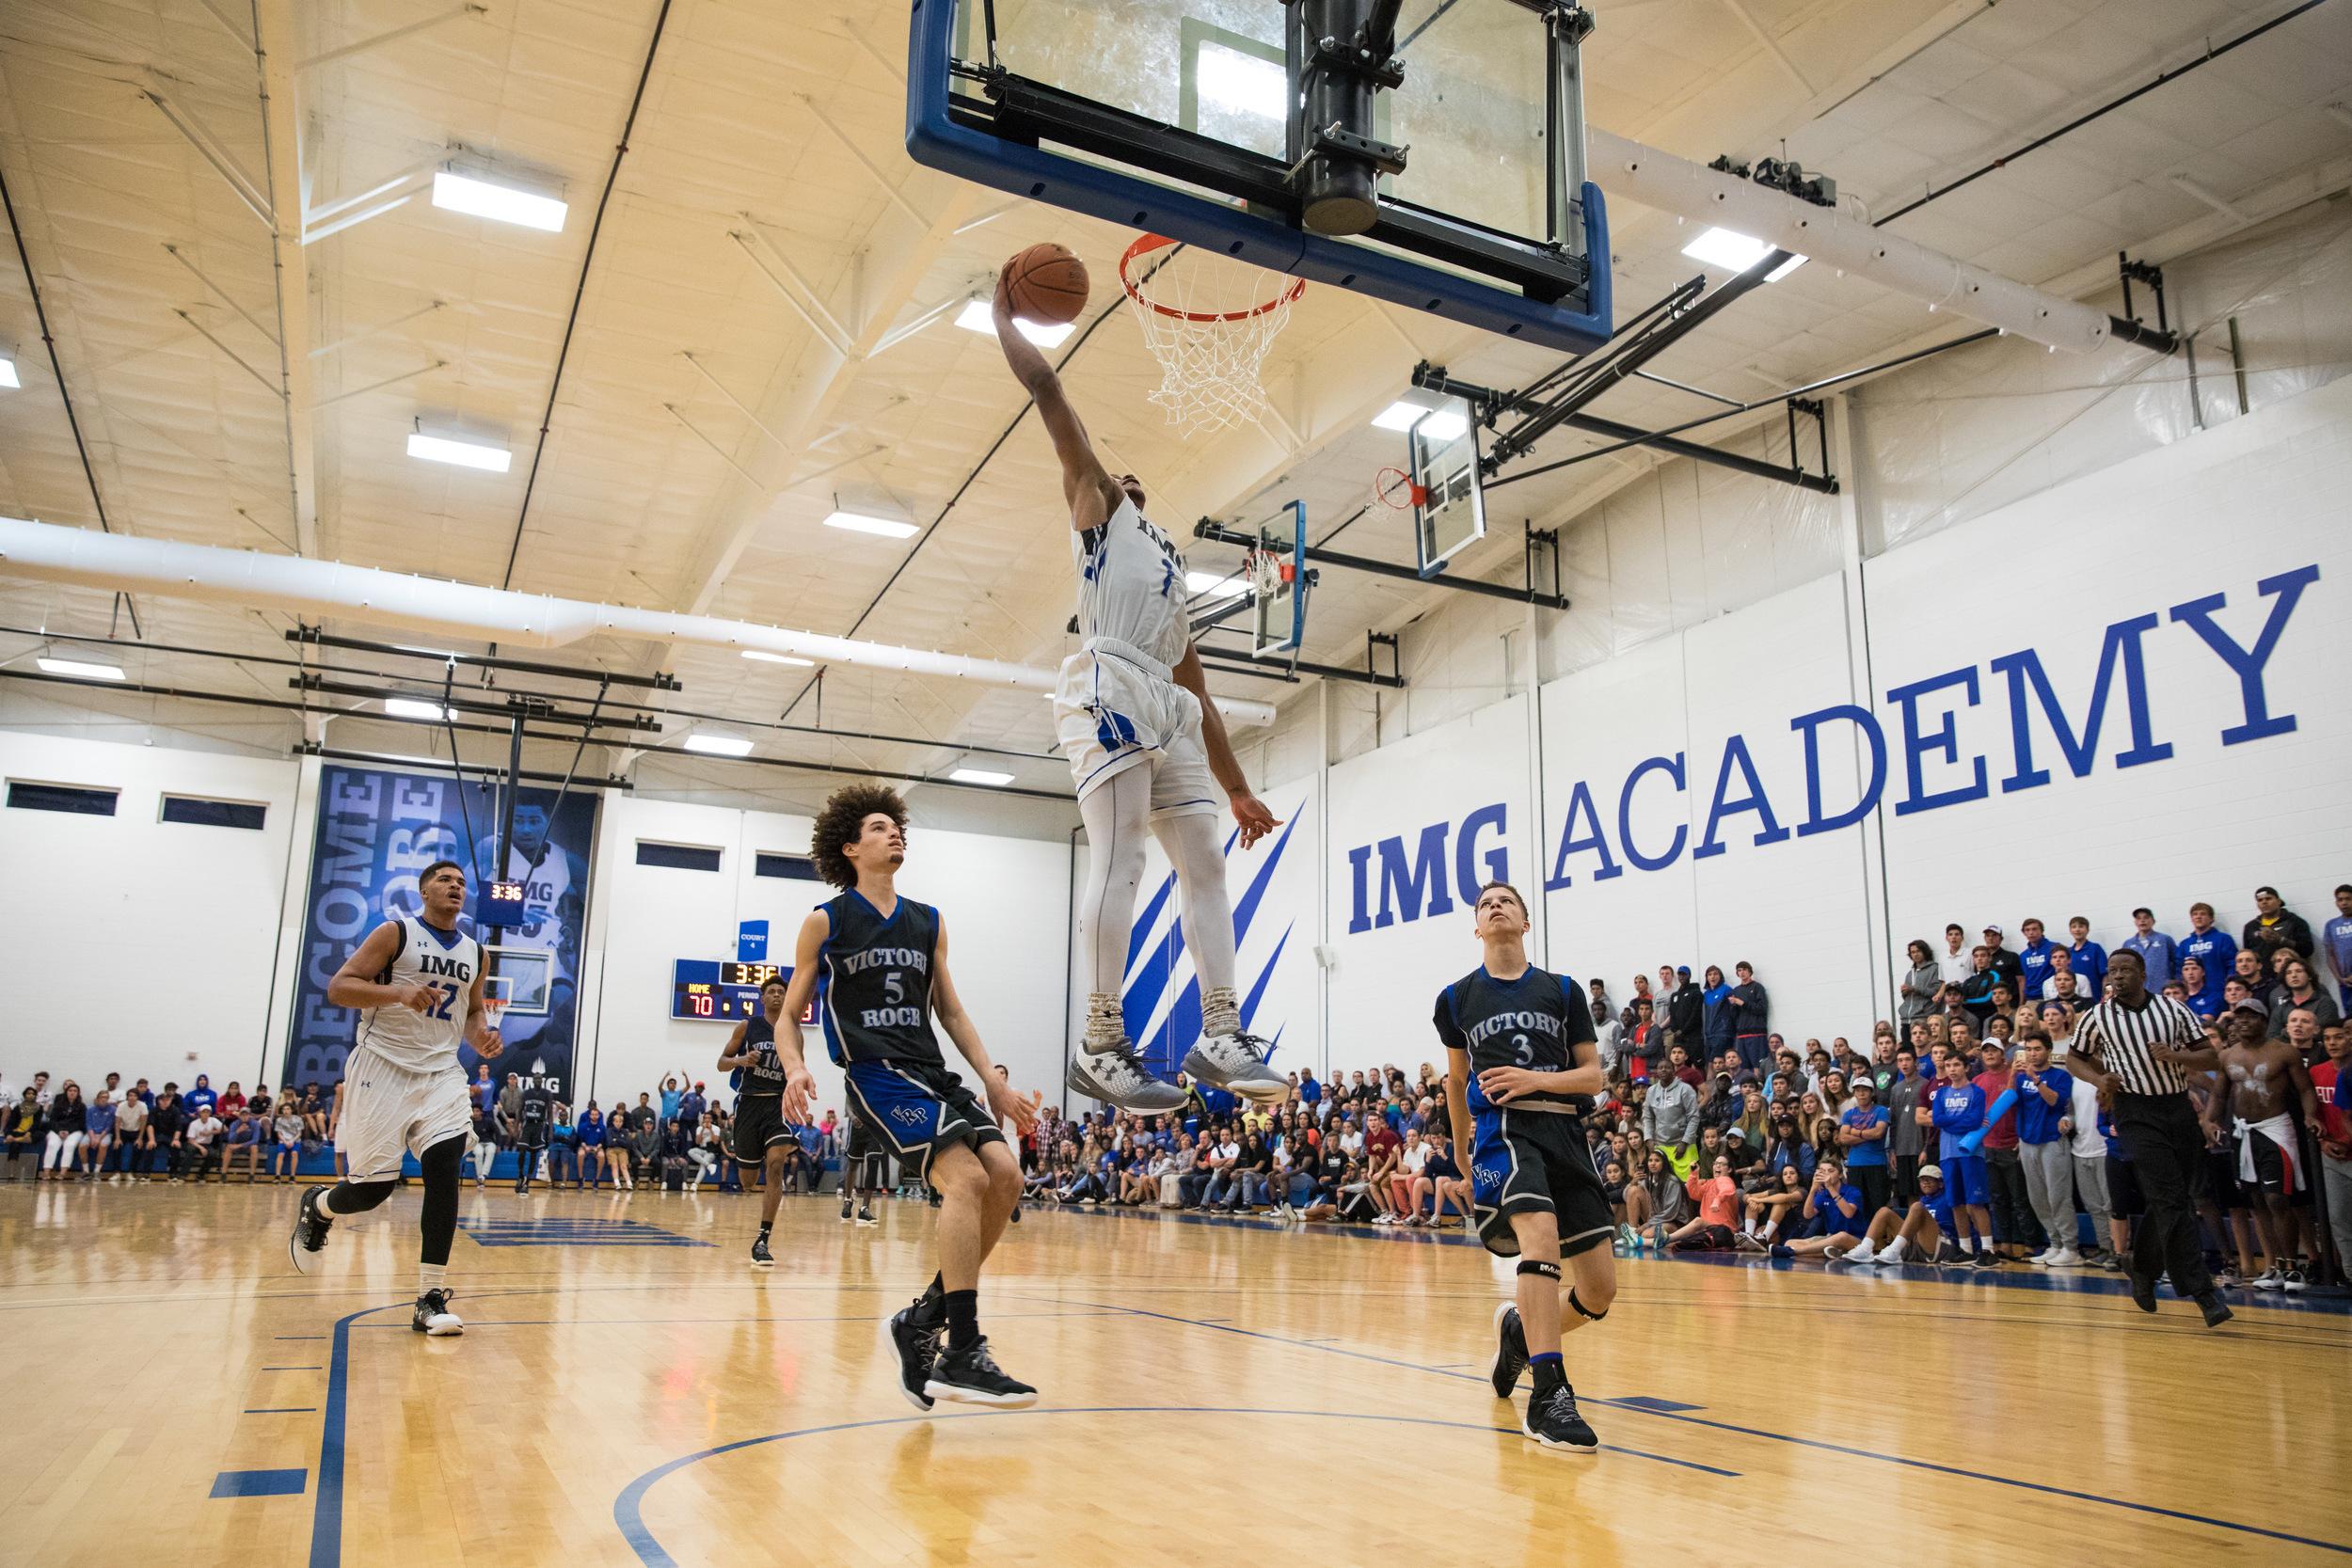 img-academy-boys-girls-basketball-from-the-court-to-the-classroom